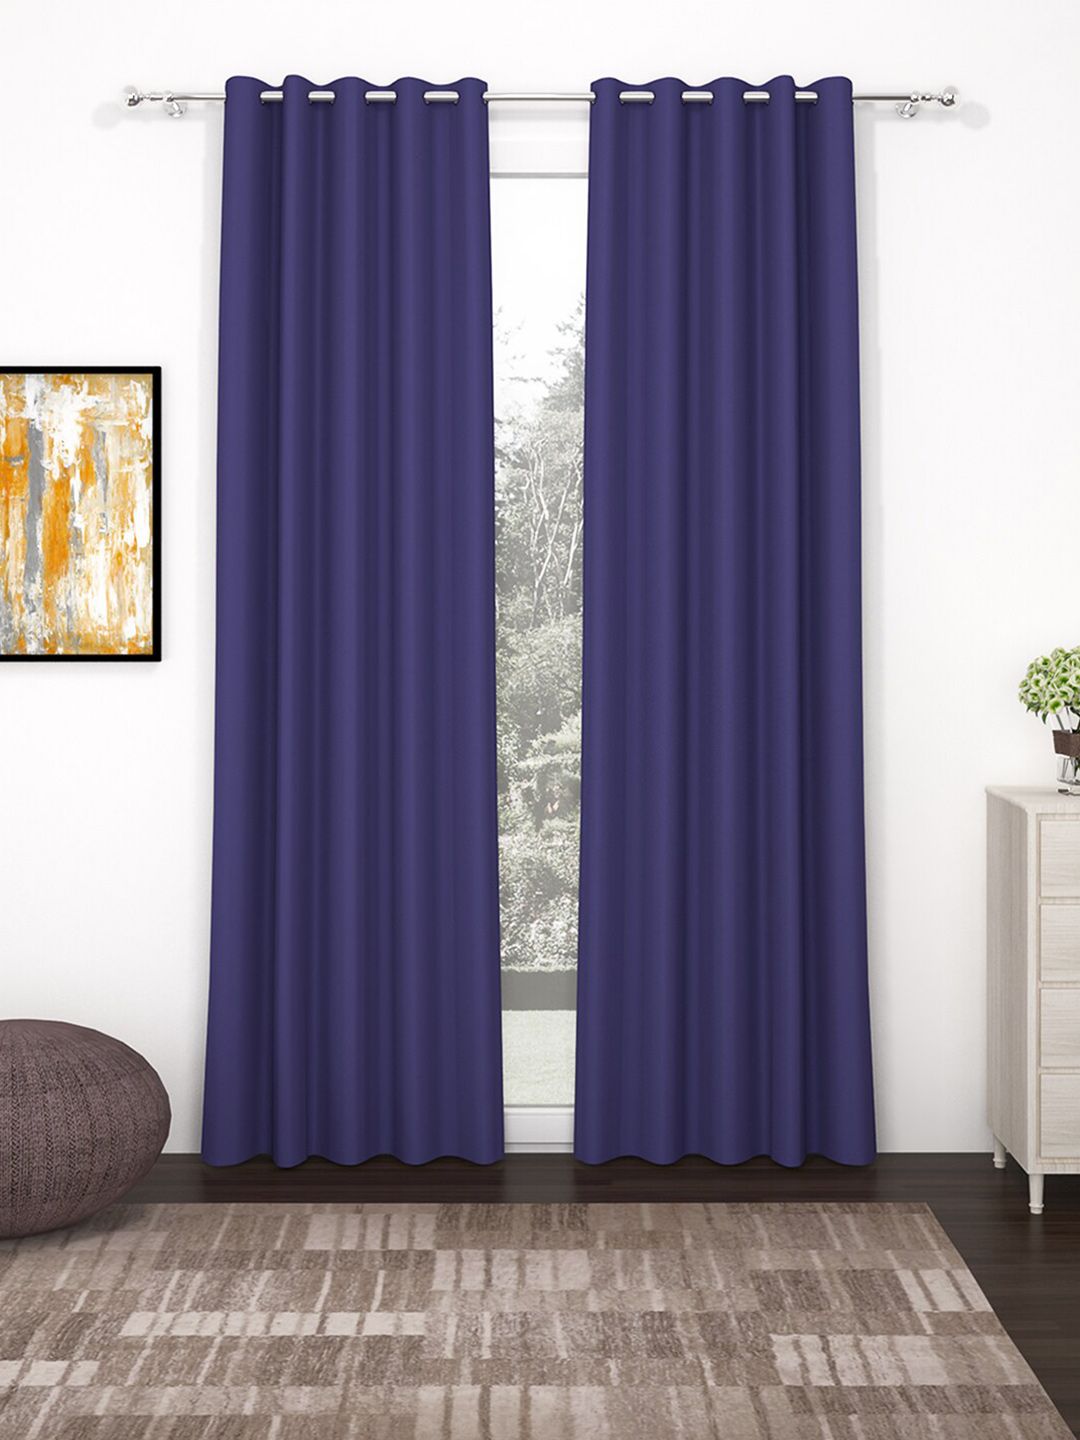 Story@home Violet Set of 2 Black Out Long Door Curtain Price in India